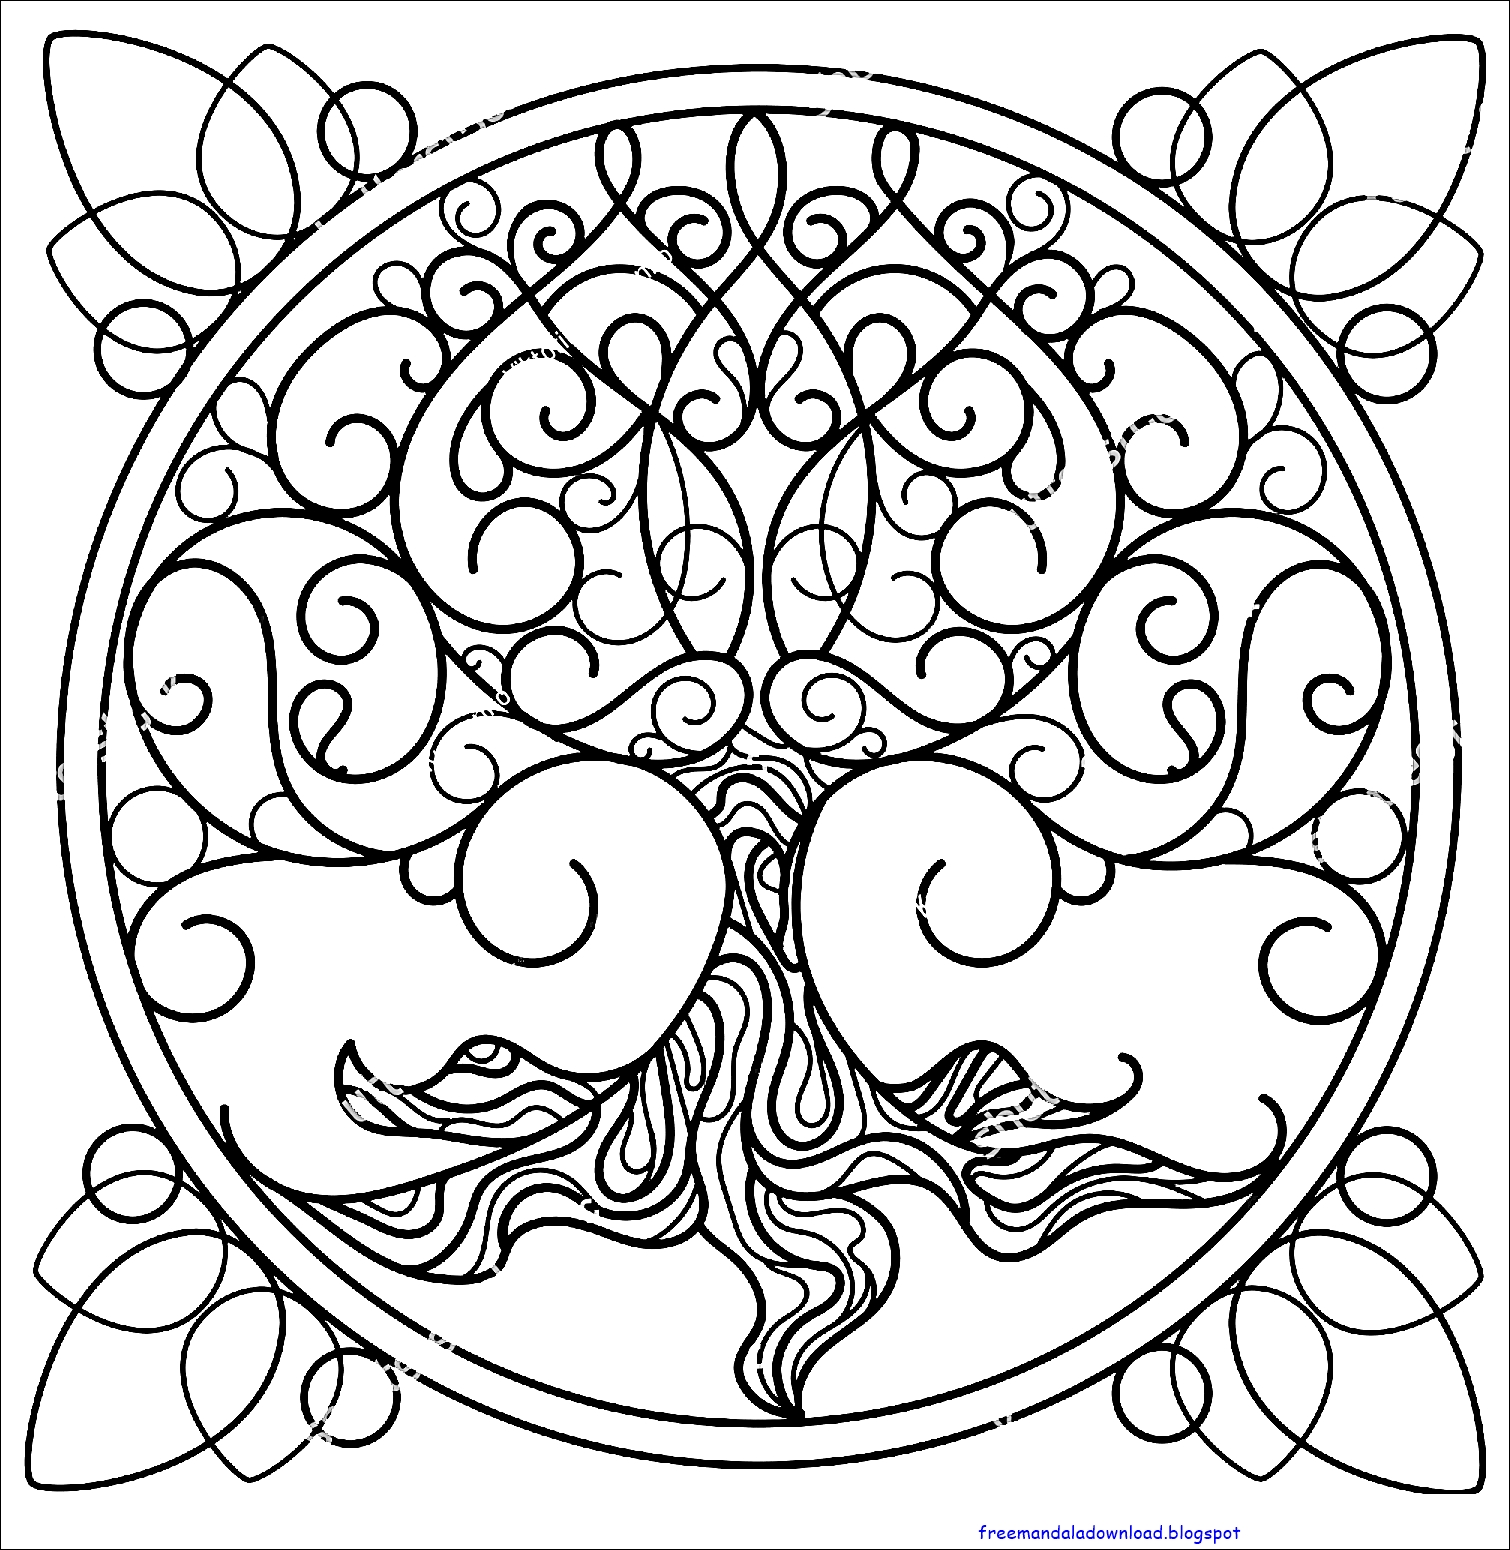 Download Tree Of Life Layered Mandala Svg - 246+ SVG File for DIY Machine for Cricut, Silhouette and Other Machine